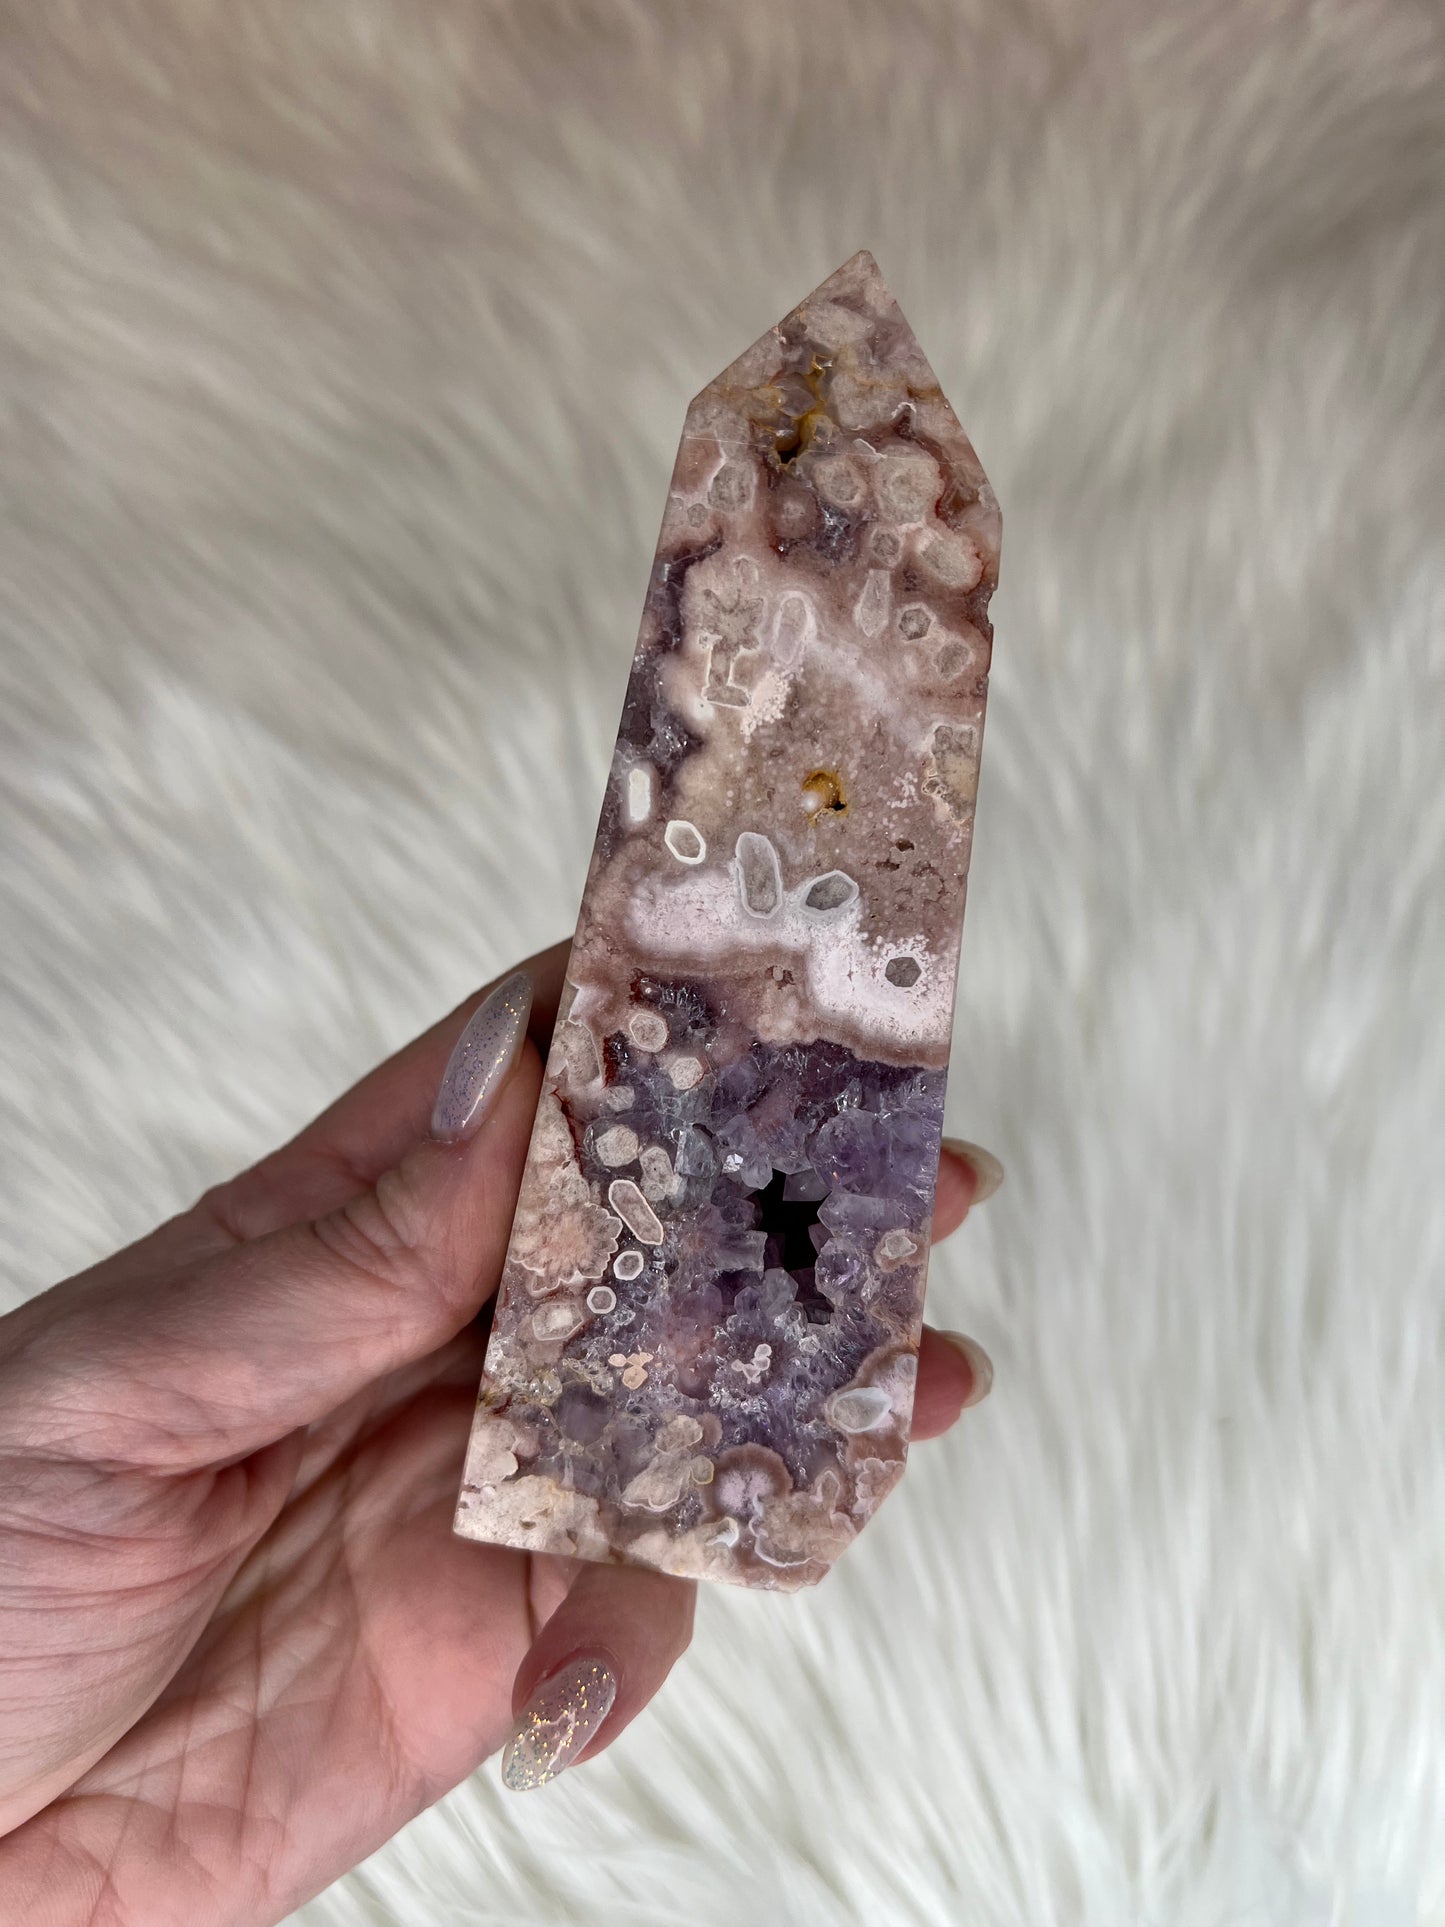 Amethyst X Flower Agate Towers (Part 2)